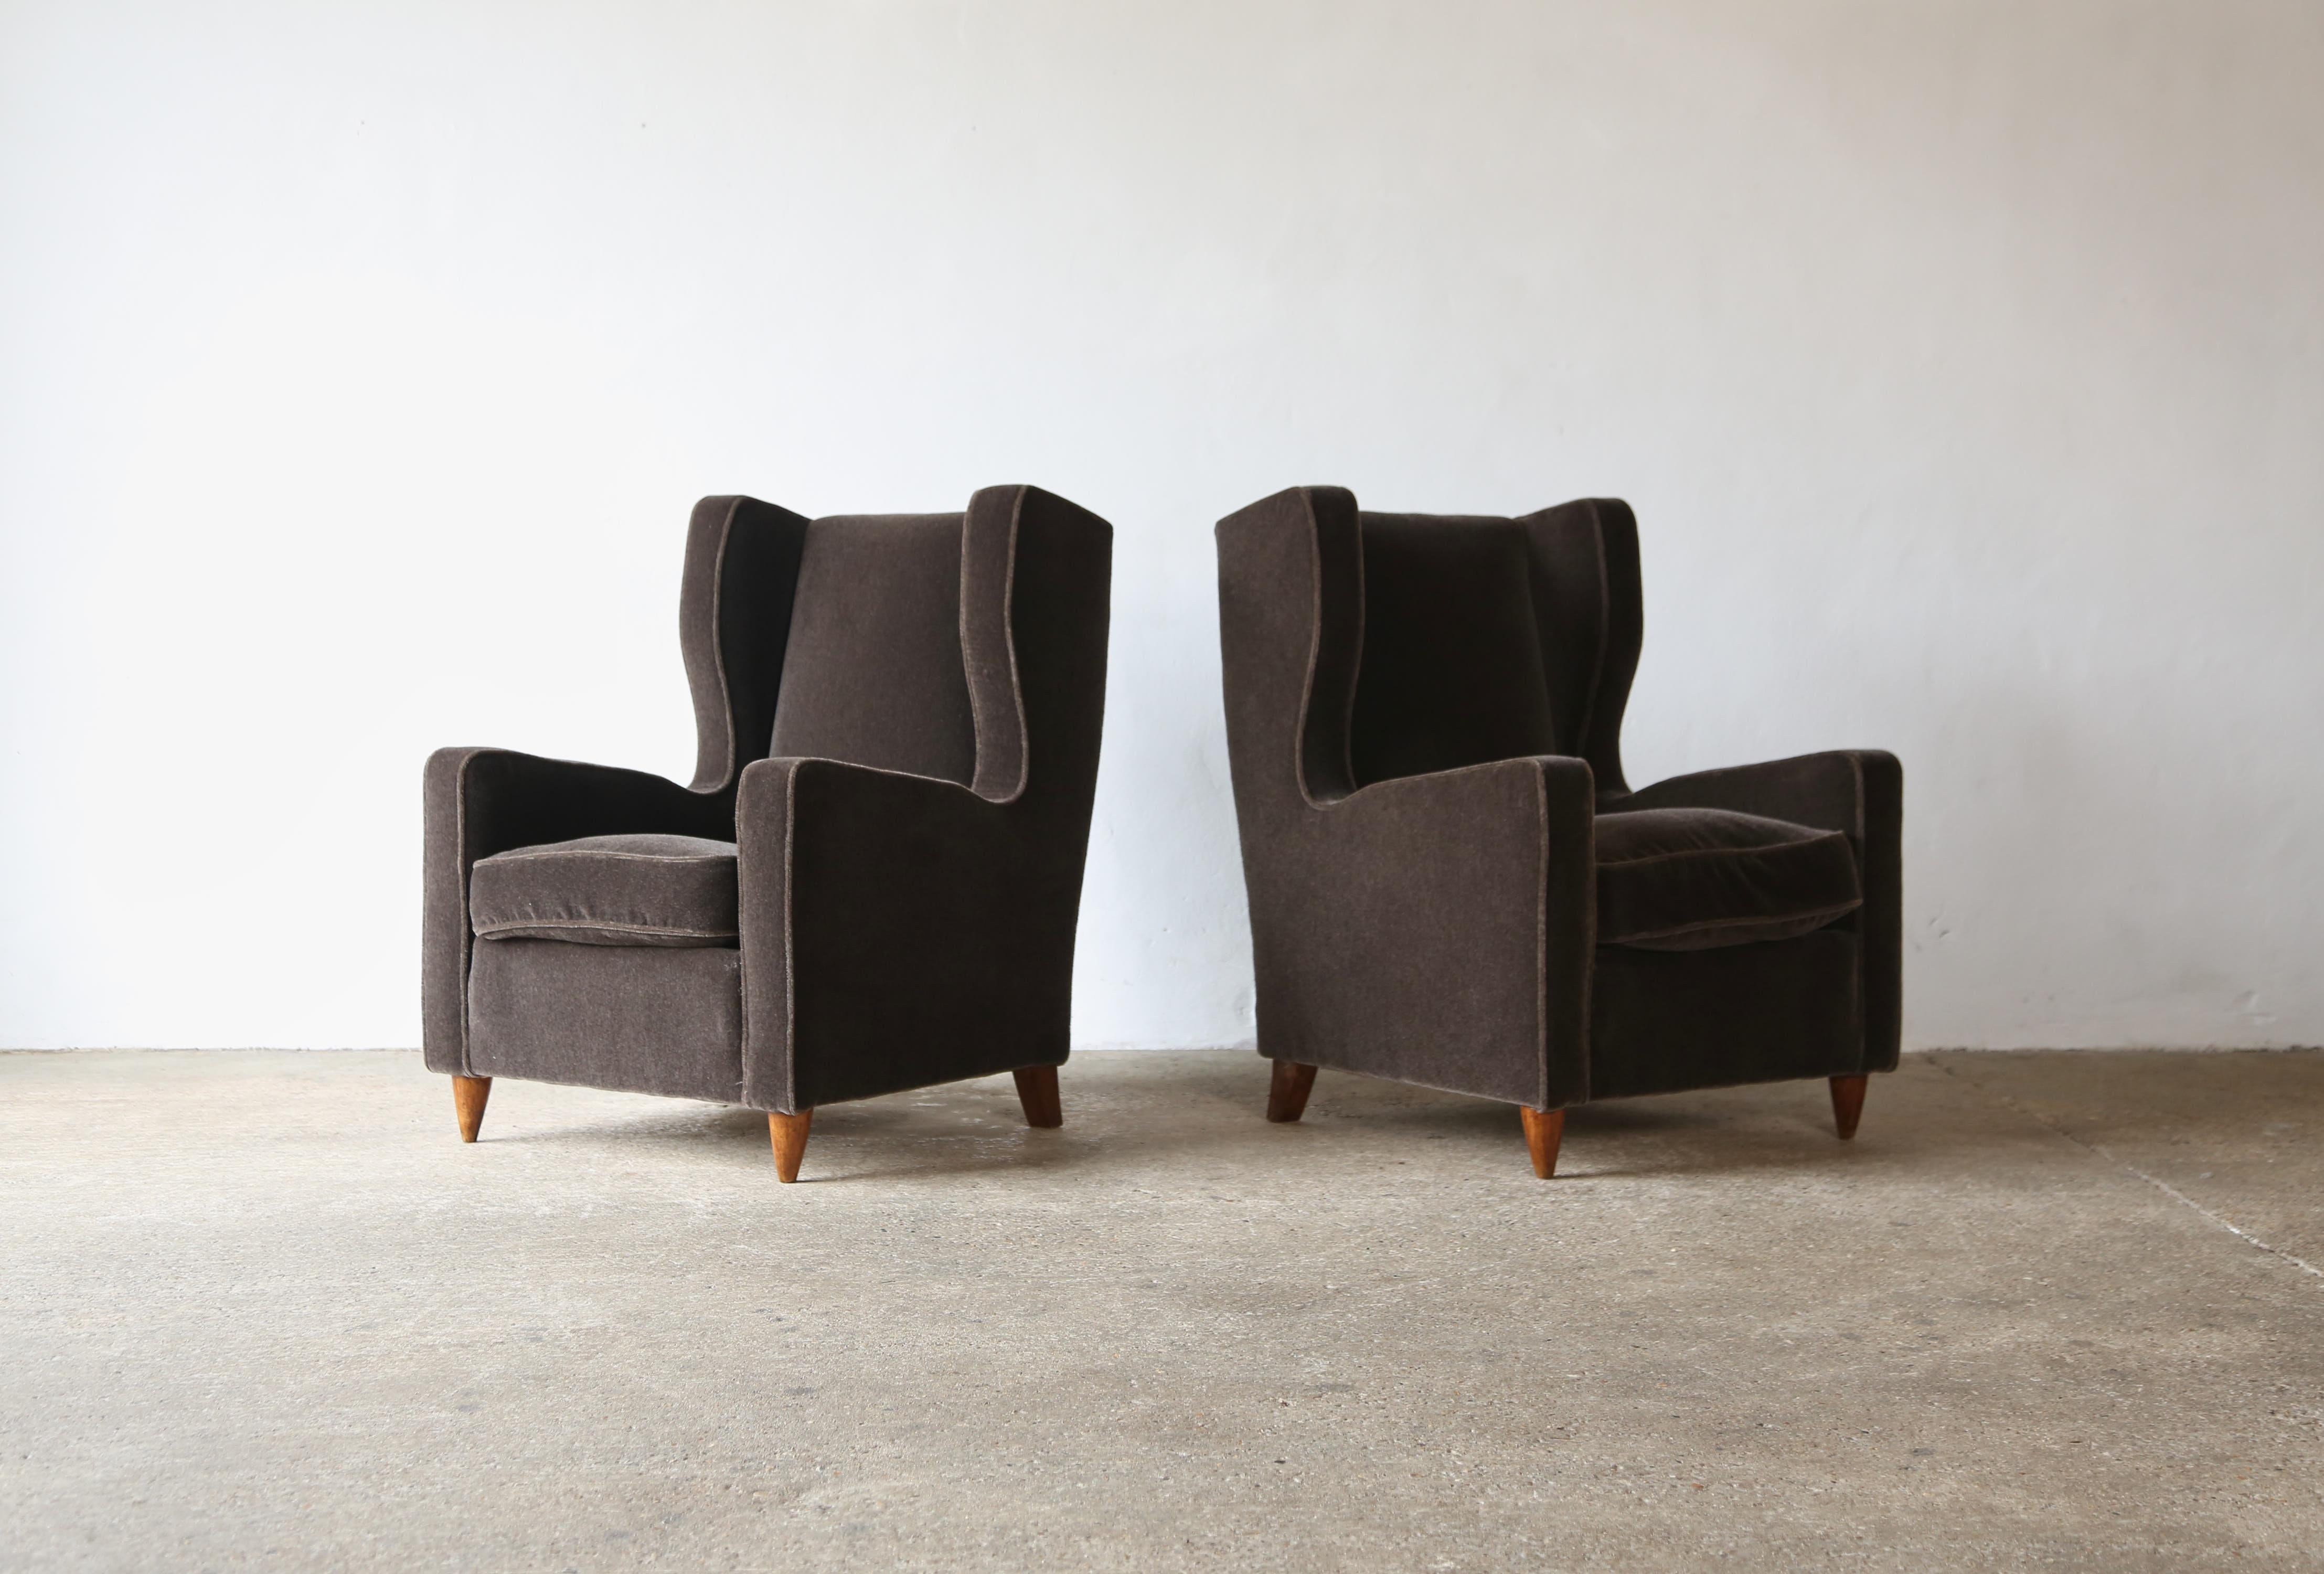 A handsome pair of armchairs attributed to Paolo Buffa, Italy, 1950s.   The chairs are newly upholstered in a premium taupe (dark brown with a hint of grey) pure mohair fabric and feather seat cushions.    Fast shipping worldwide.
  
